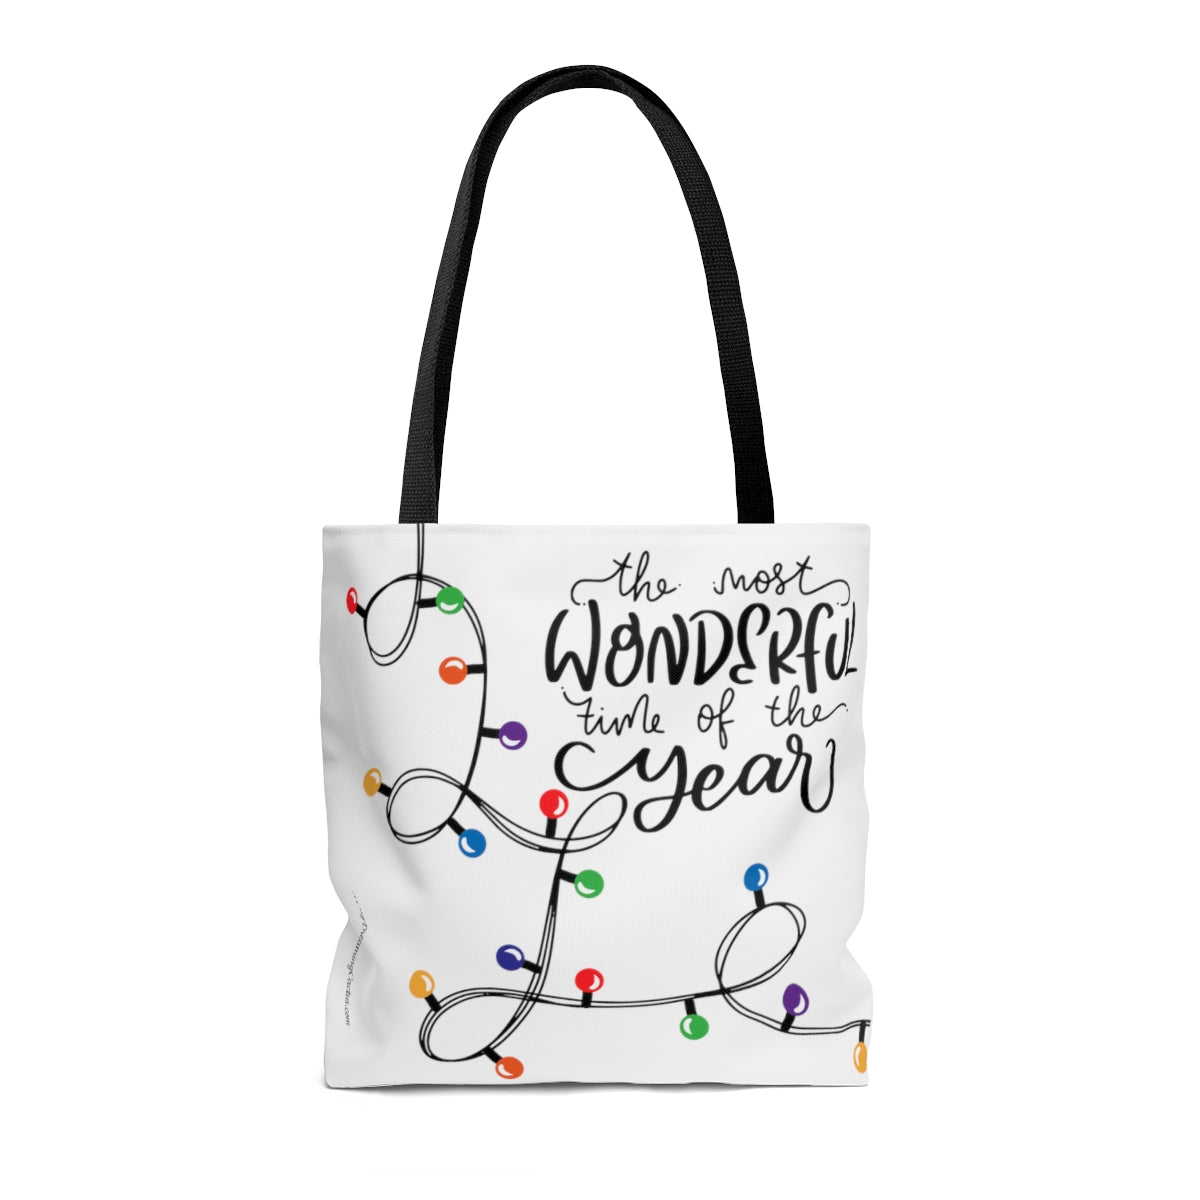 The Most Wonderful Time of Year Tote Bag - Travel Grocery Carry-on